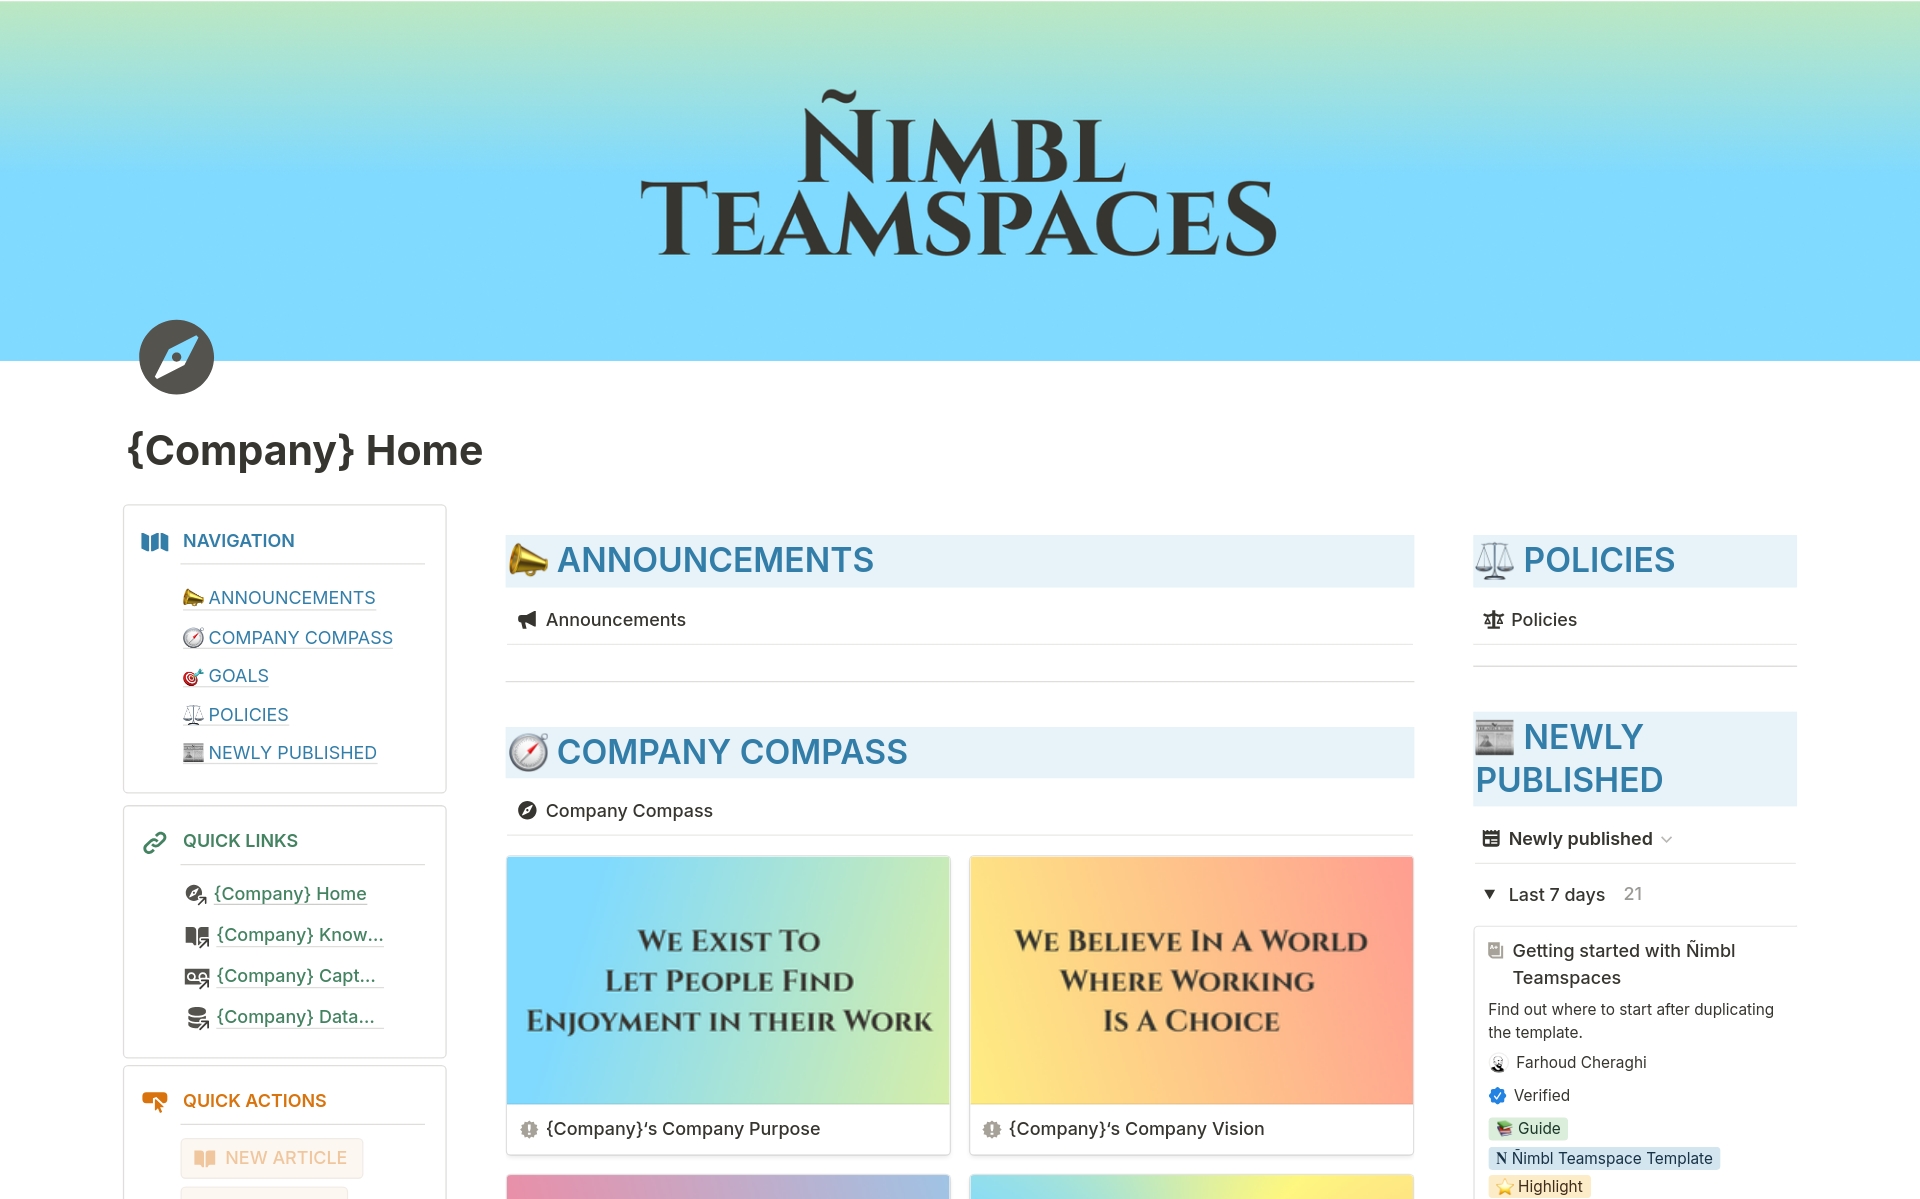 Ñimbl Teamspaces provides your Notion workspace with the foundation for effective knowledge management, fostering better thinking and collaboration – and it was built in a Startup.

